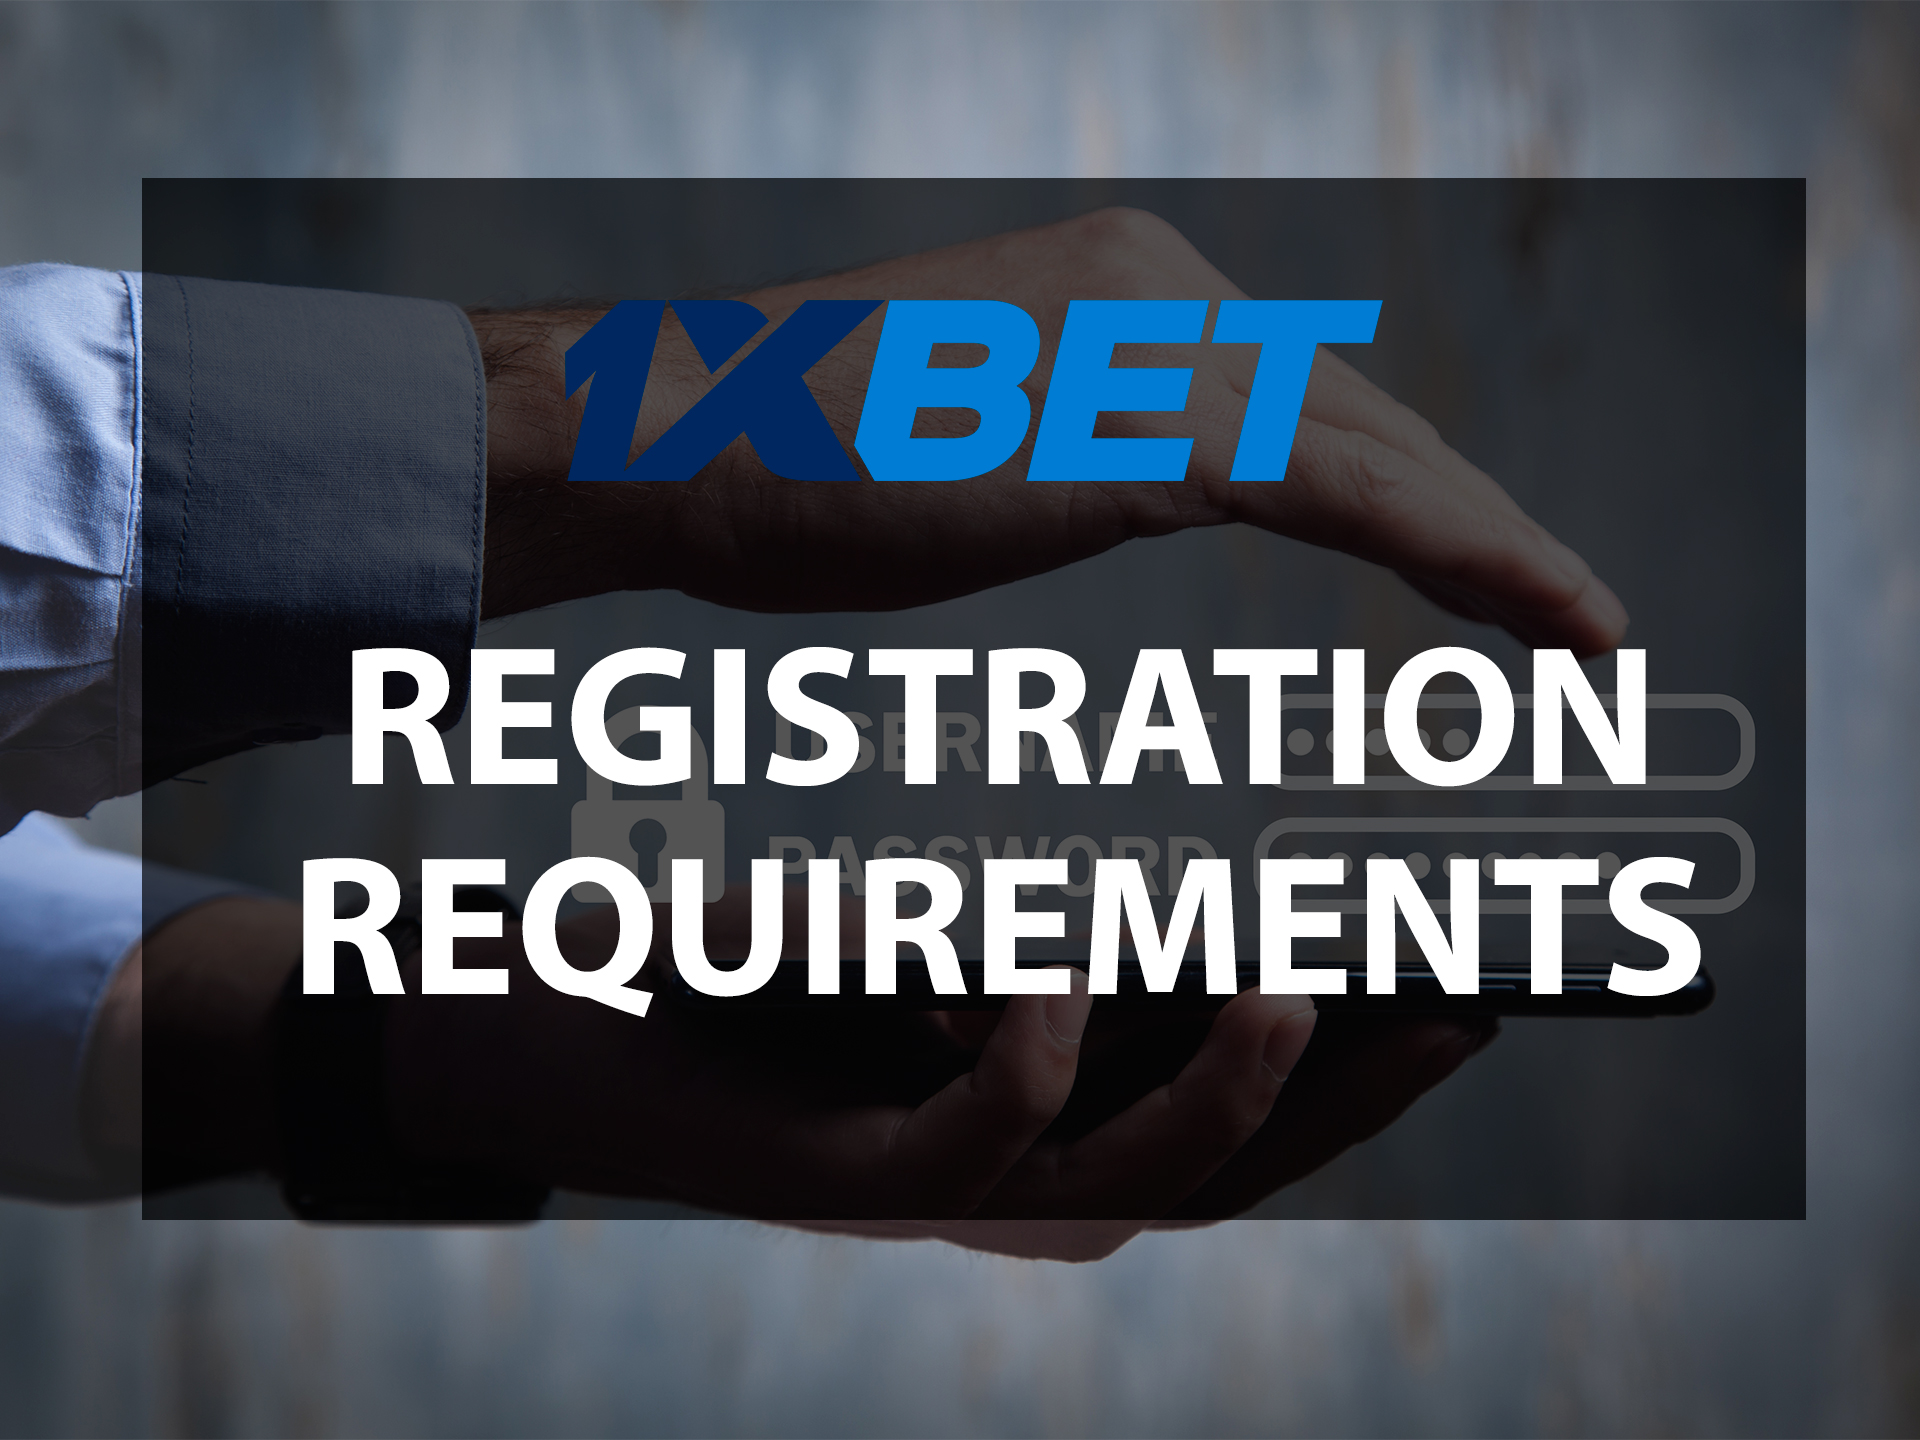 Meet all the conditions to sign up for 1xbet successfuly.